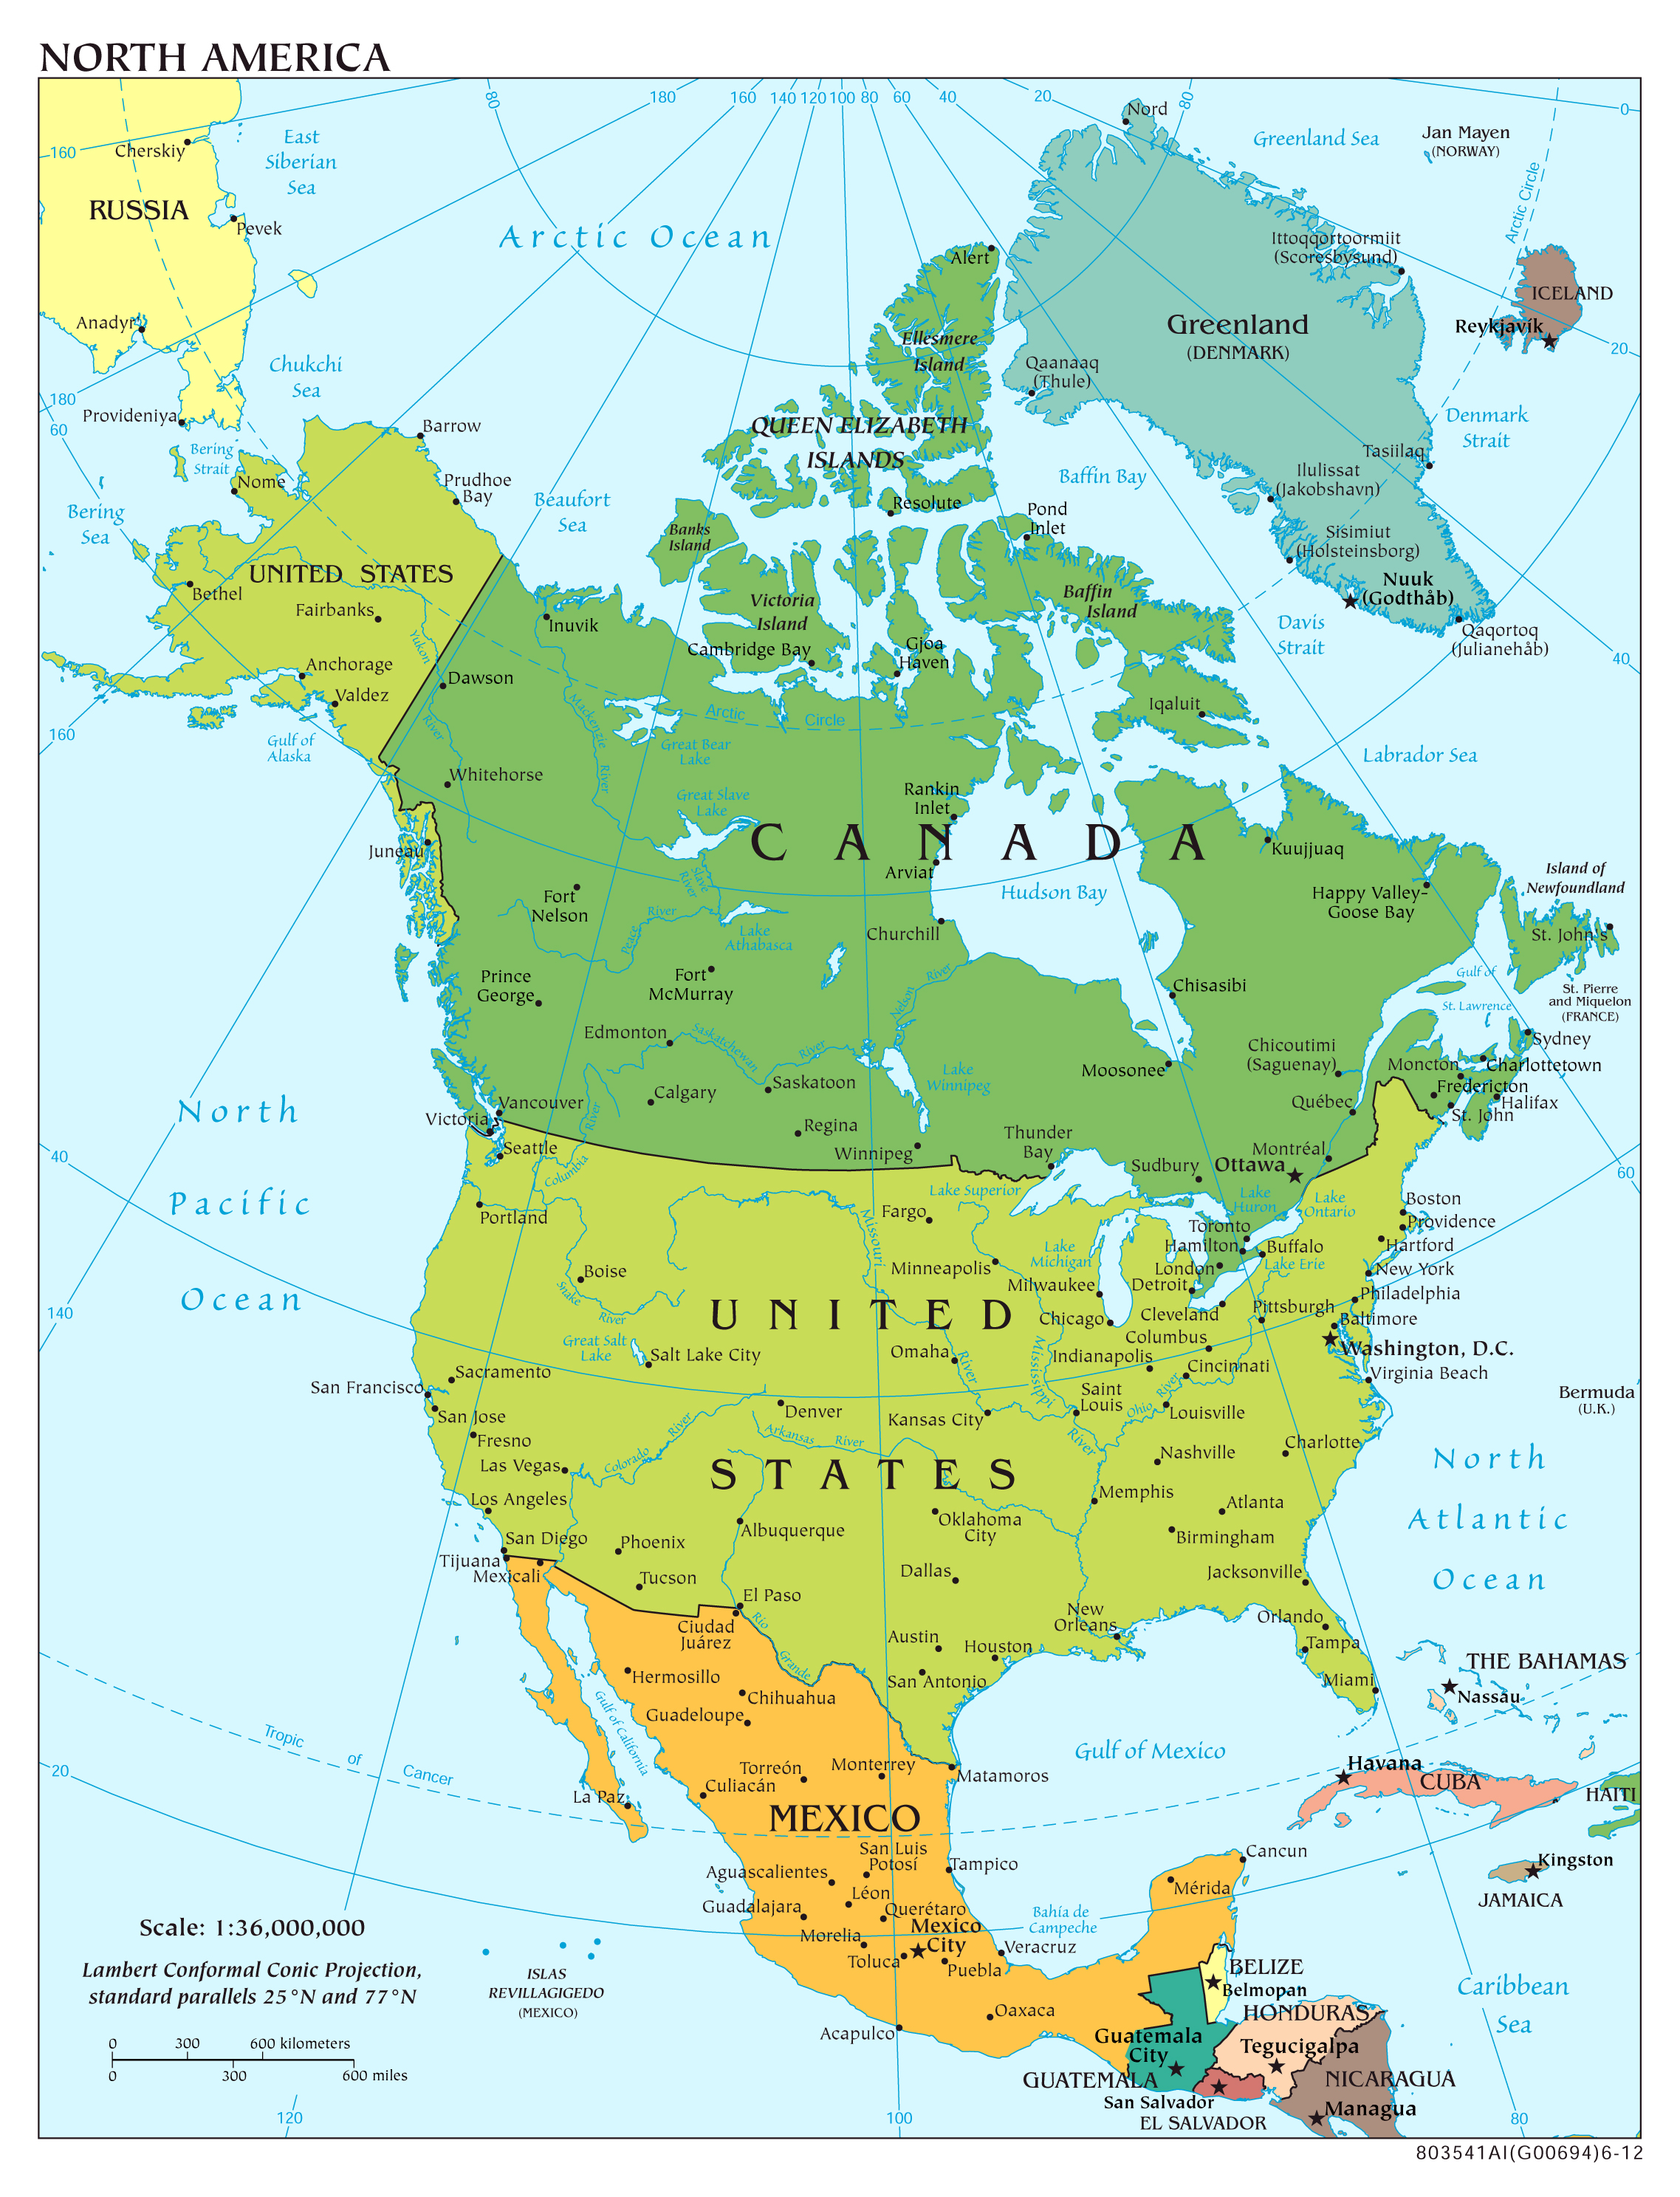 north america map with cities Large Scale Political Map Of North America With Major Cities And Capitals 2012 North America Mapsland Maps Of The World north america map with cities